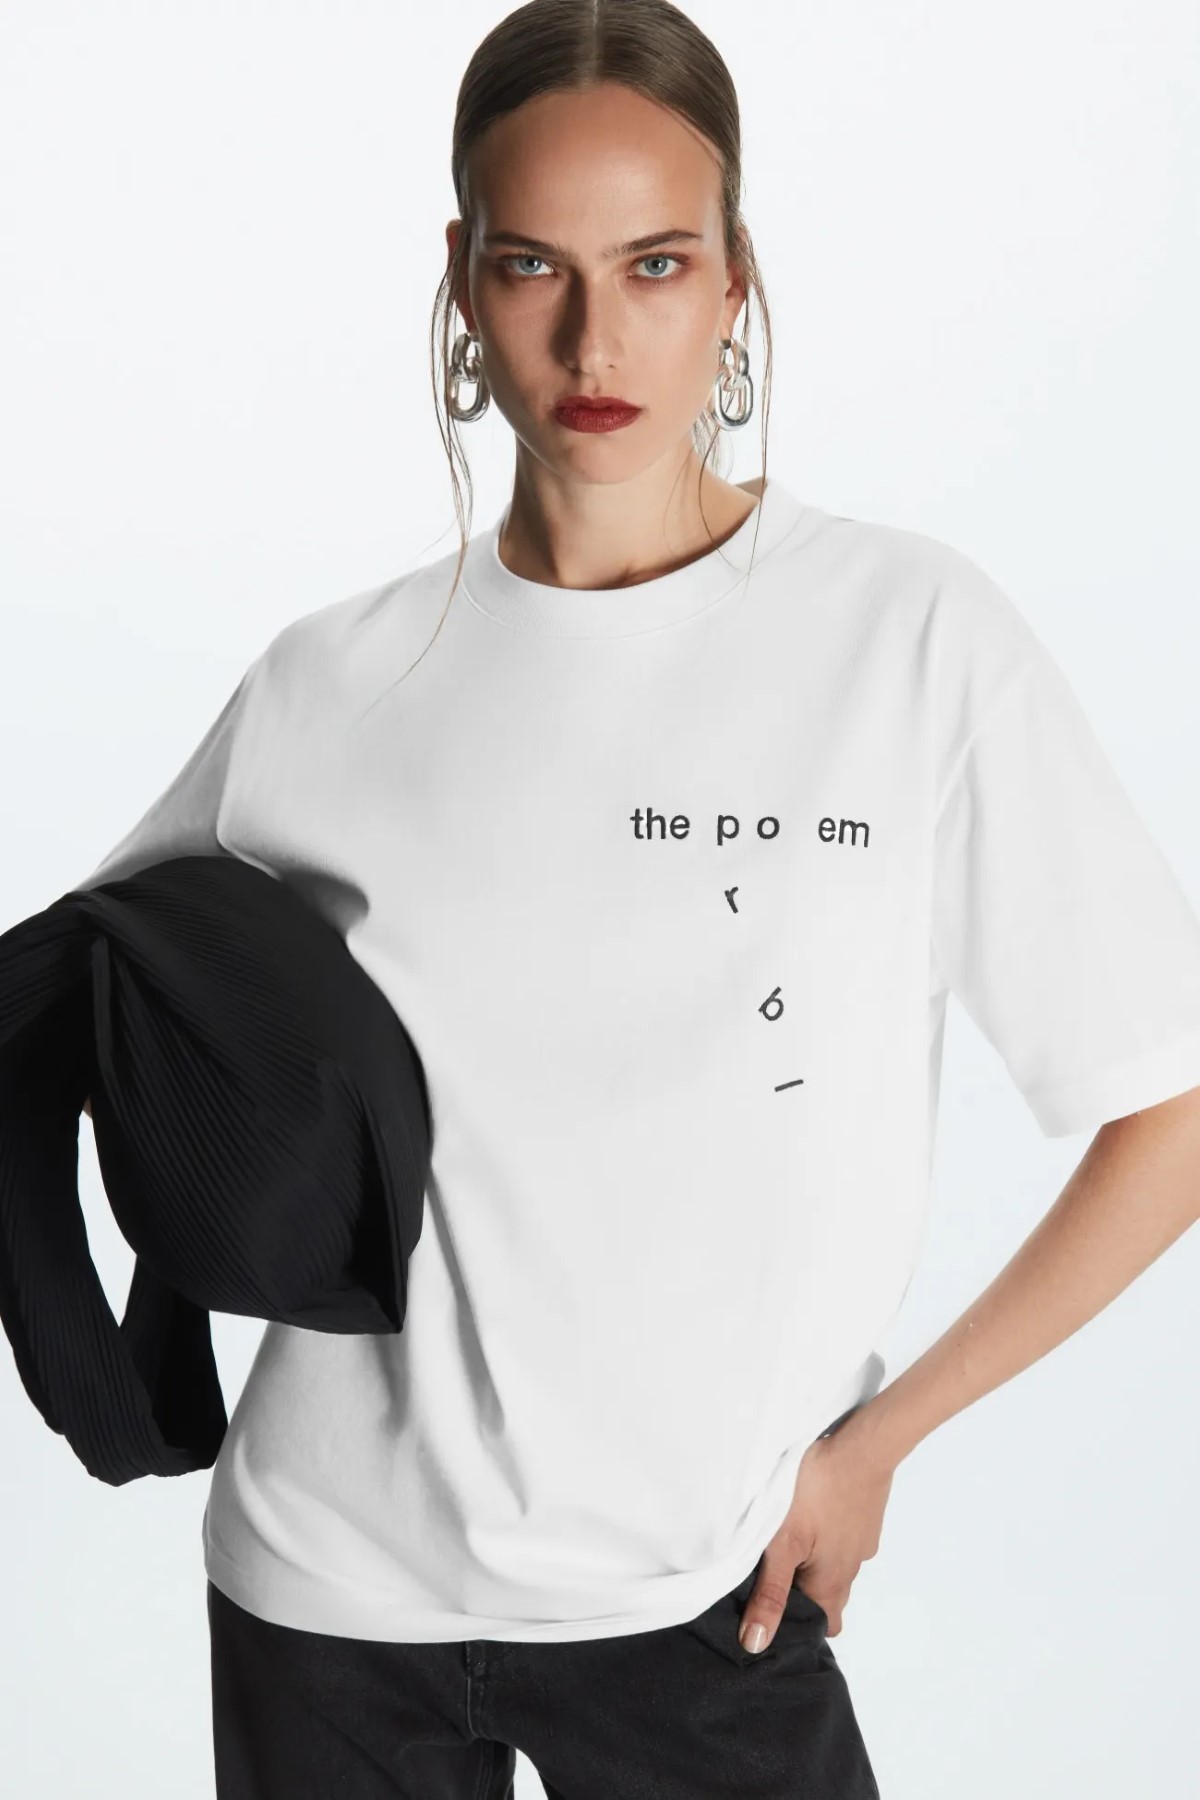 COS x Anatol Knotek collab celebrates the power of the written word